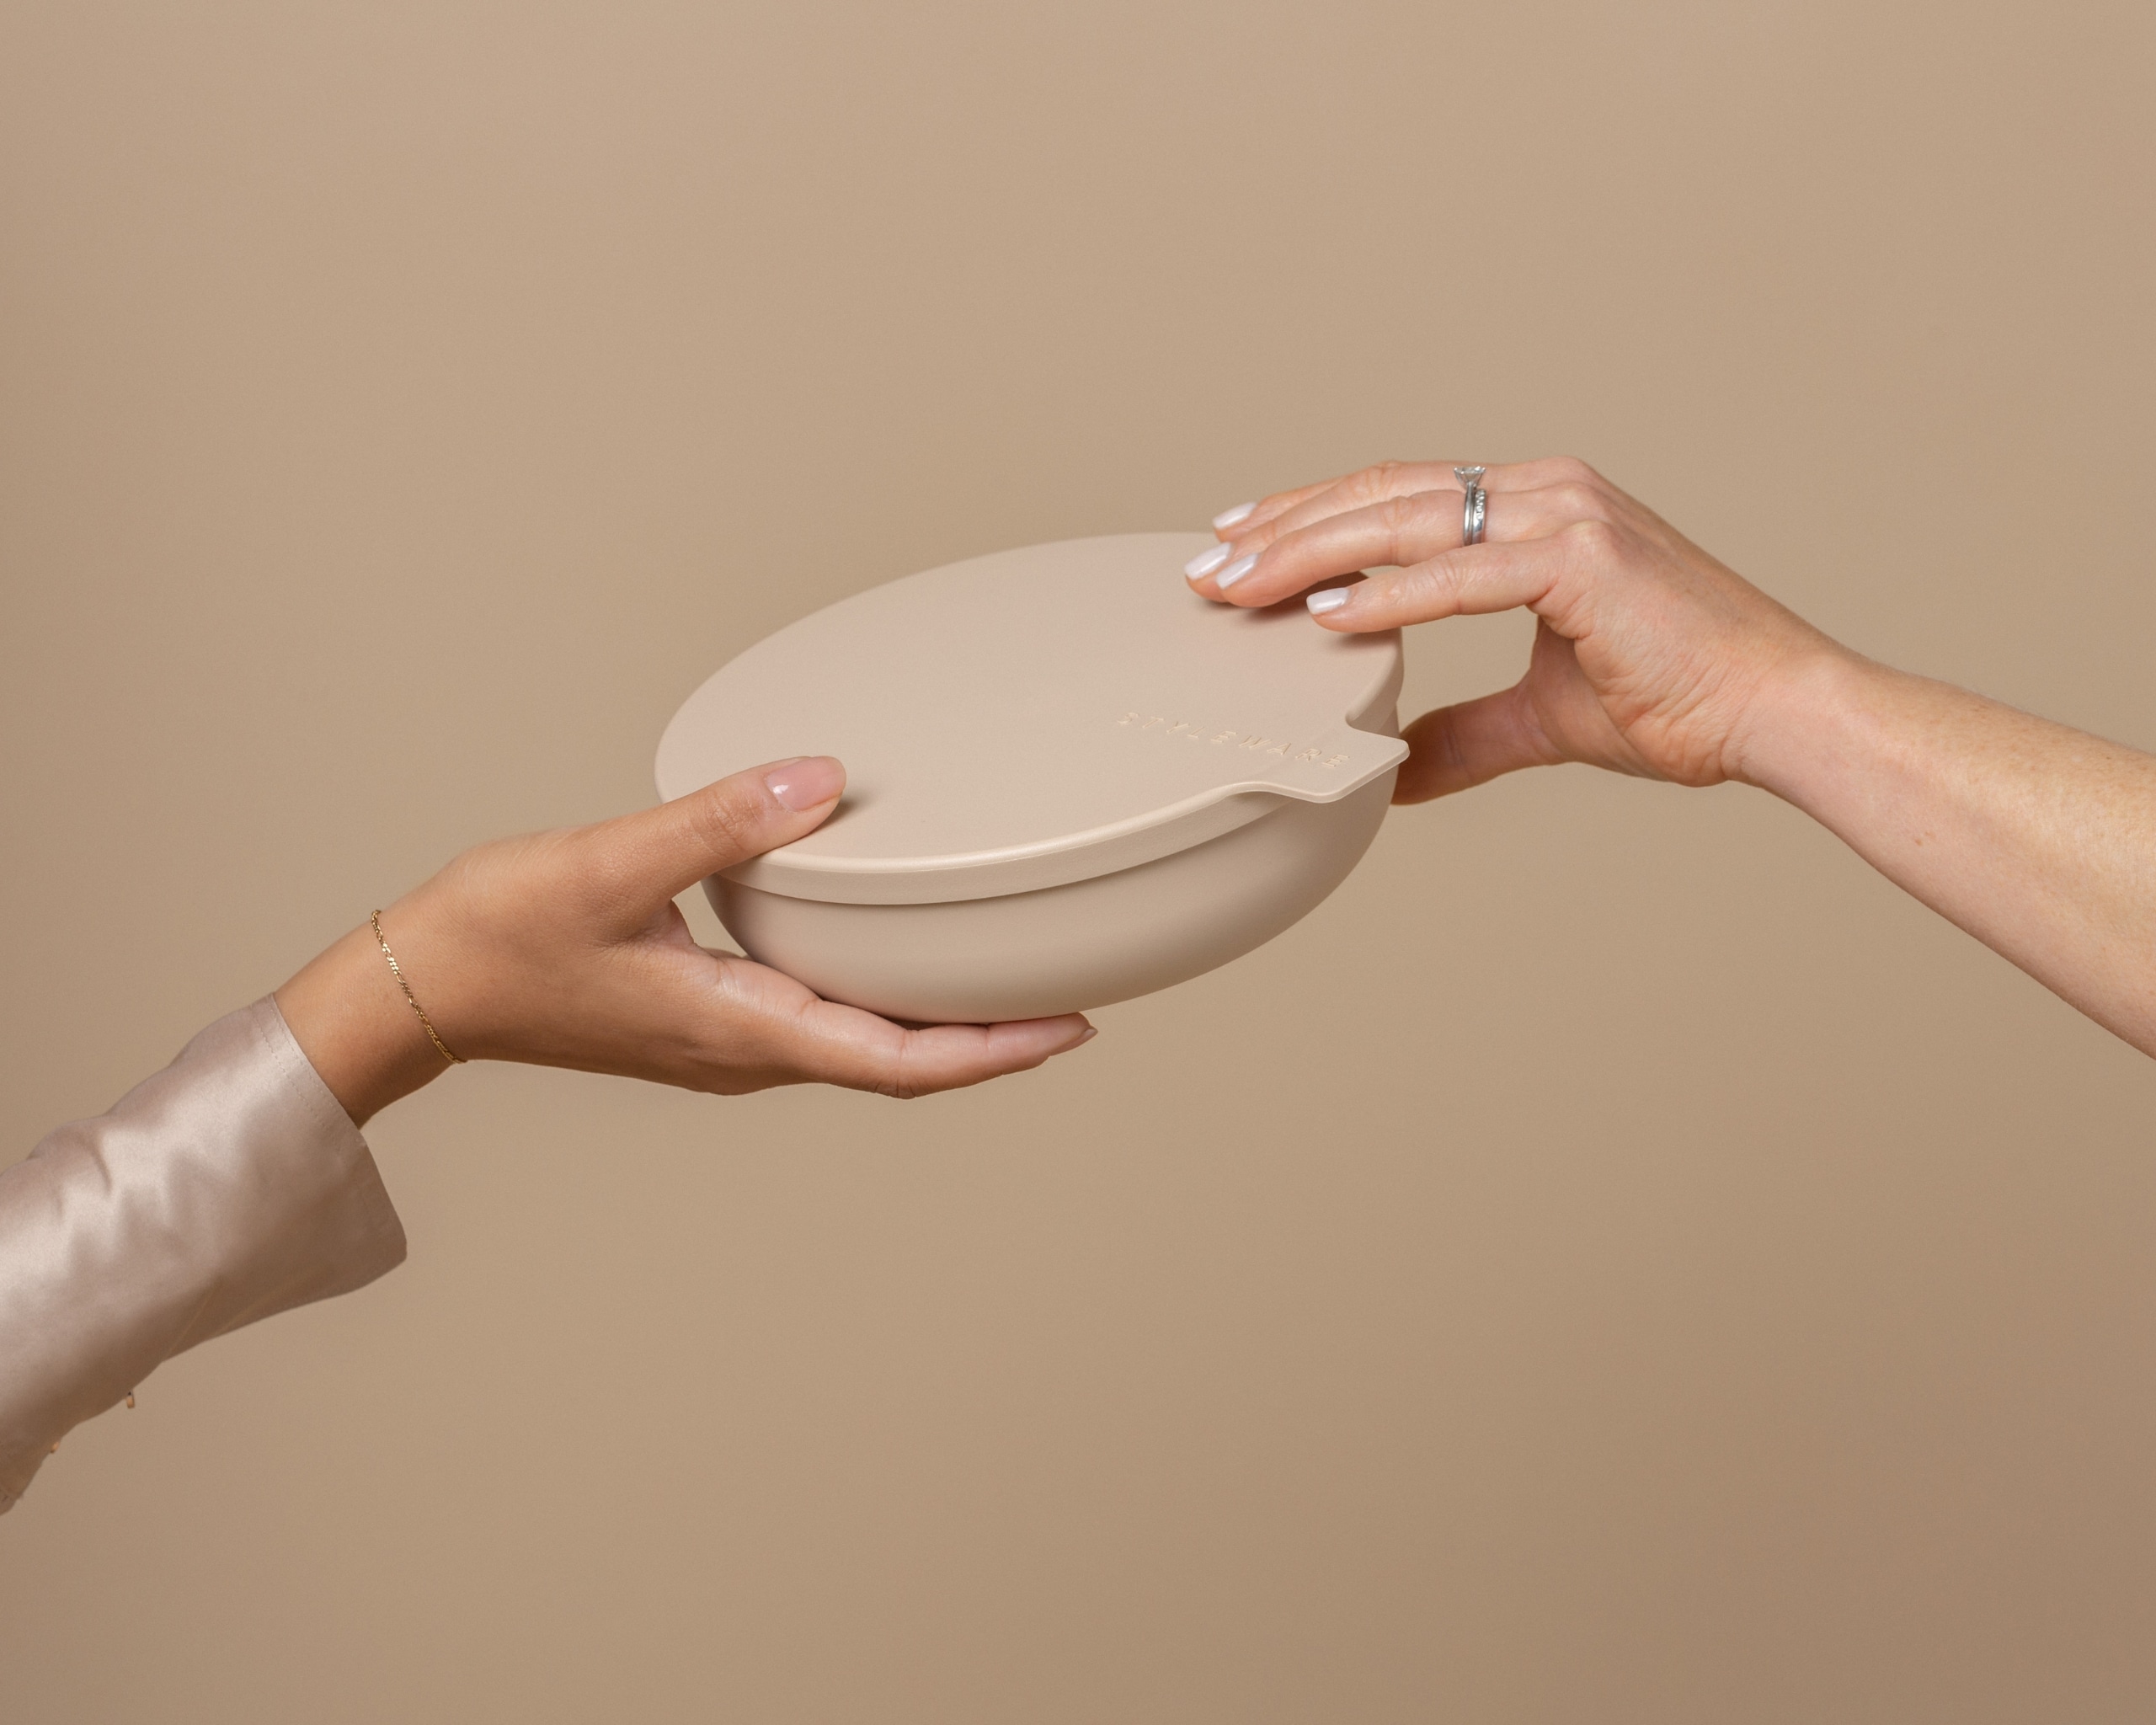 Biscotti is a soft, warm neutral and the latest addition to the Styleware Nesting Bowl and Salad Server range.